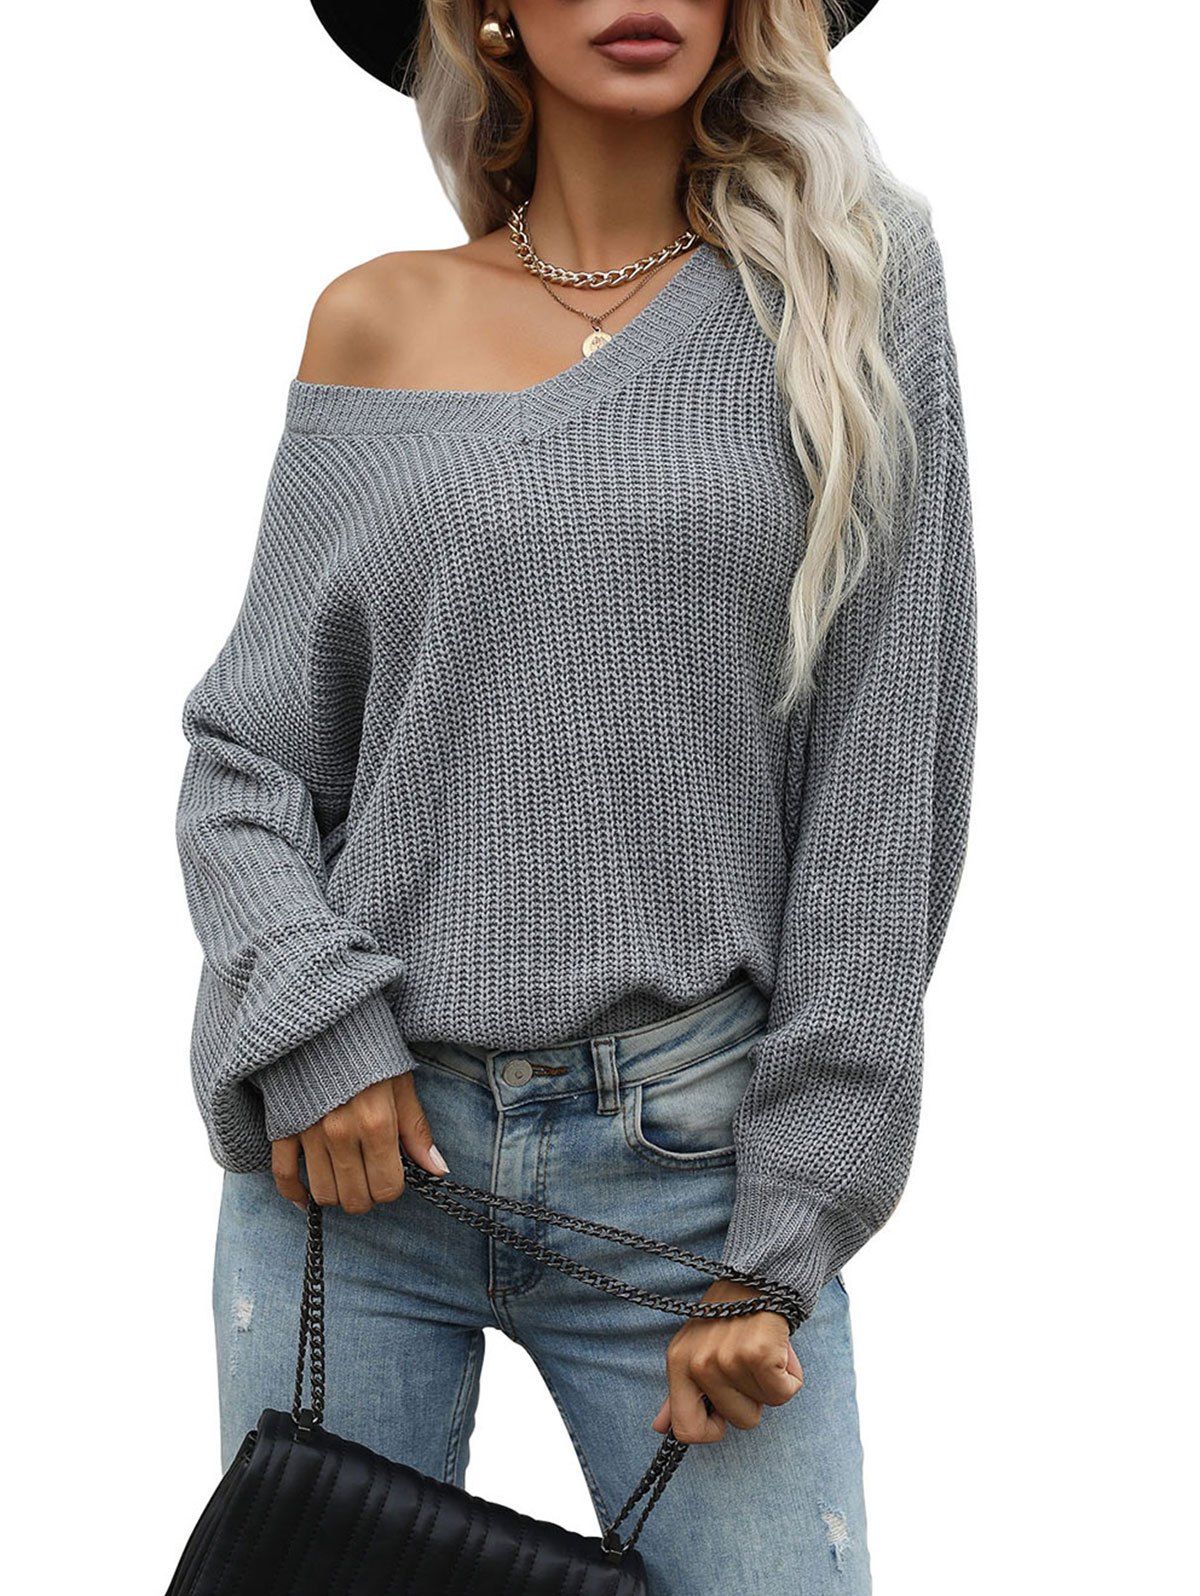 Drop Shoulder Slouchy Solid Color Sweater - GRAY M